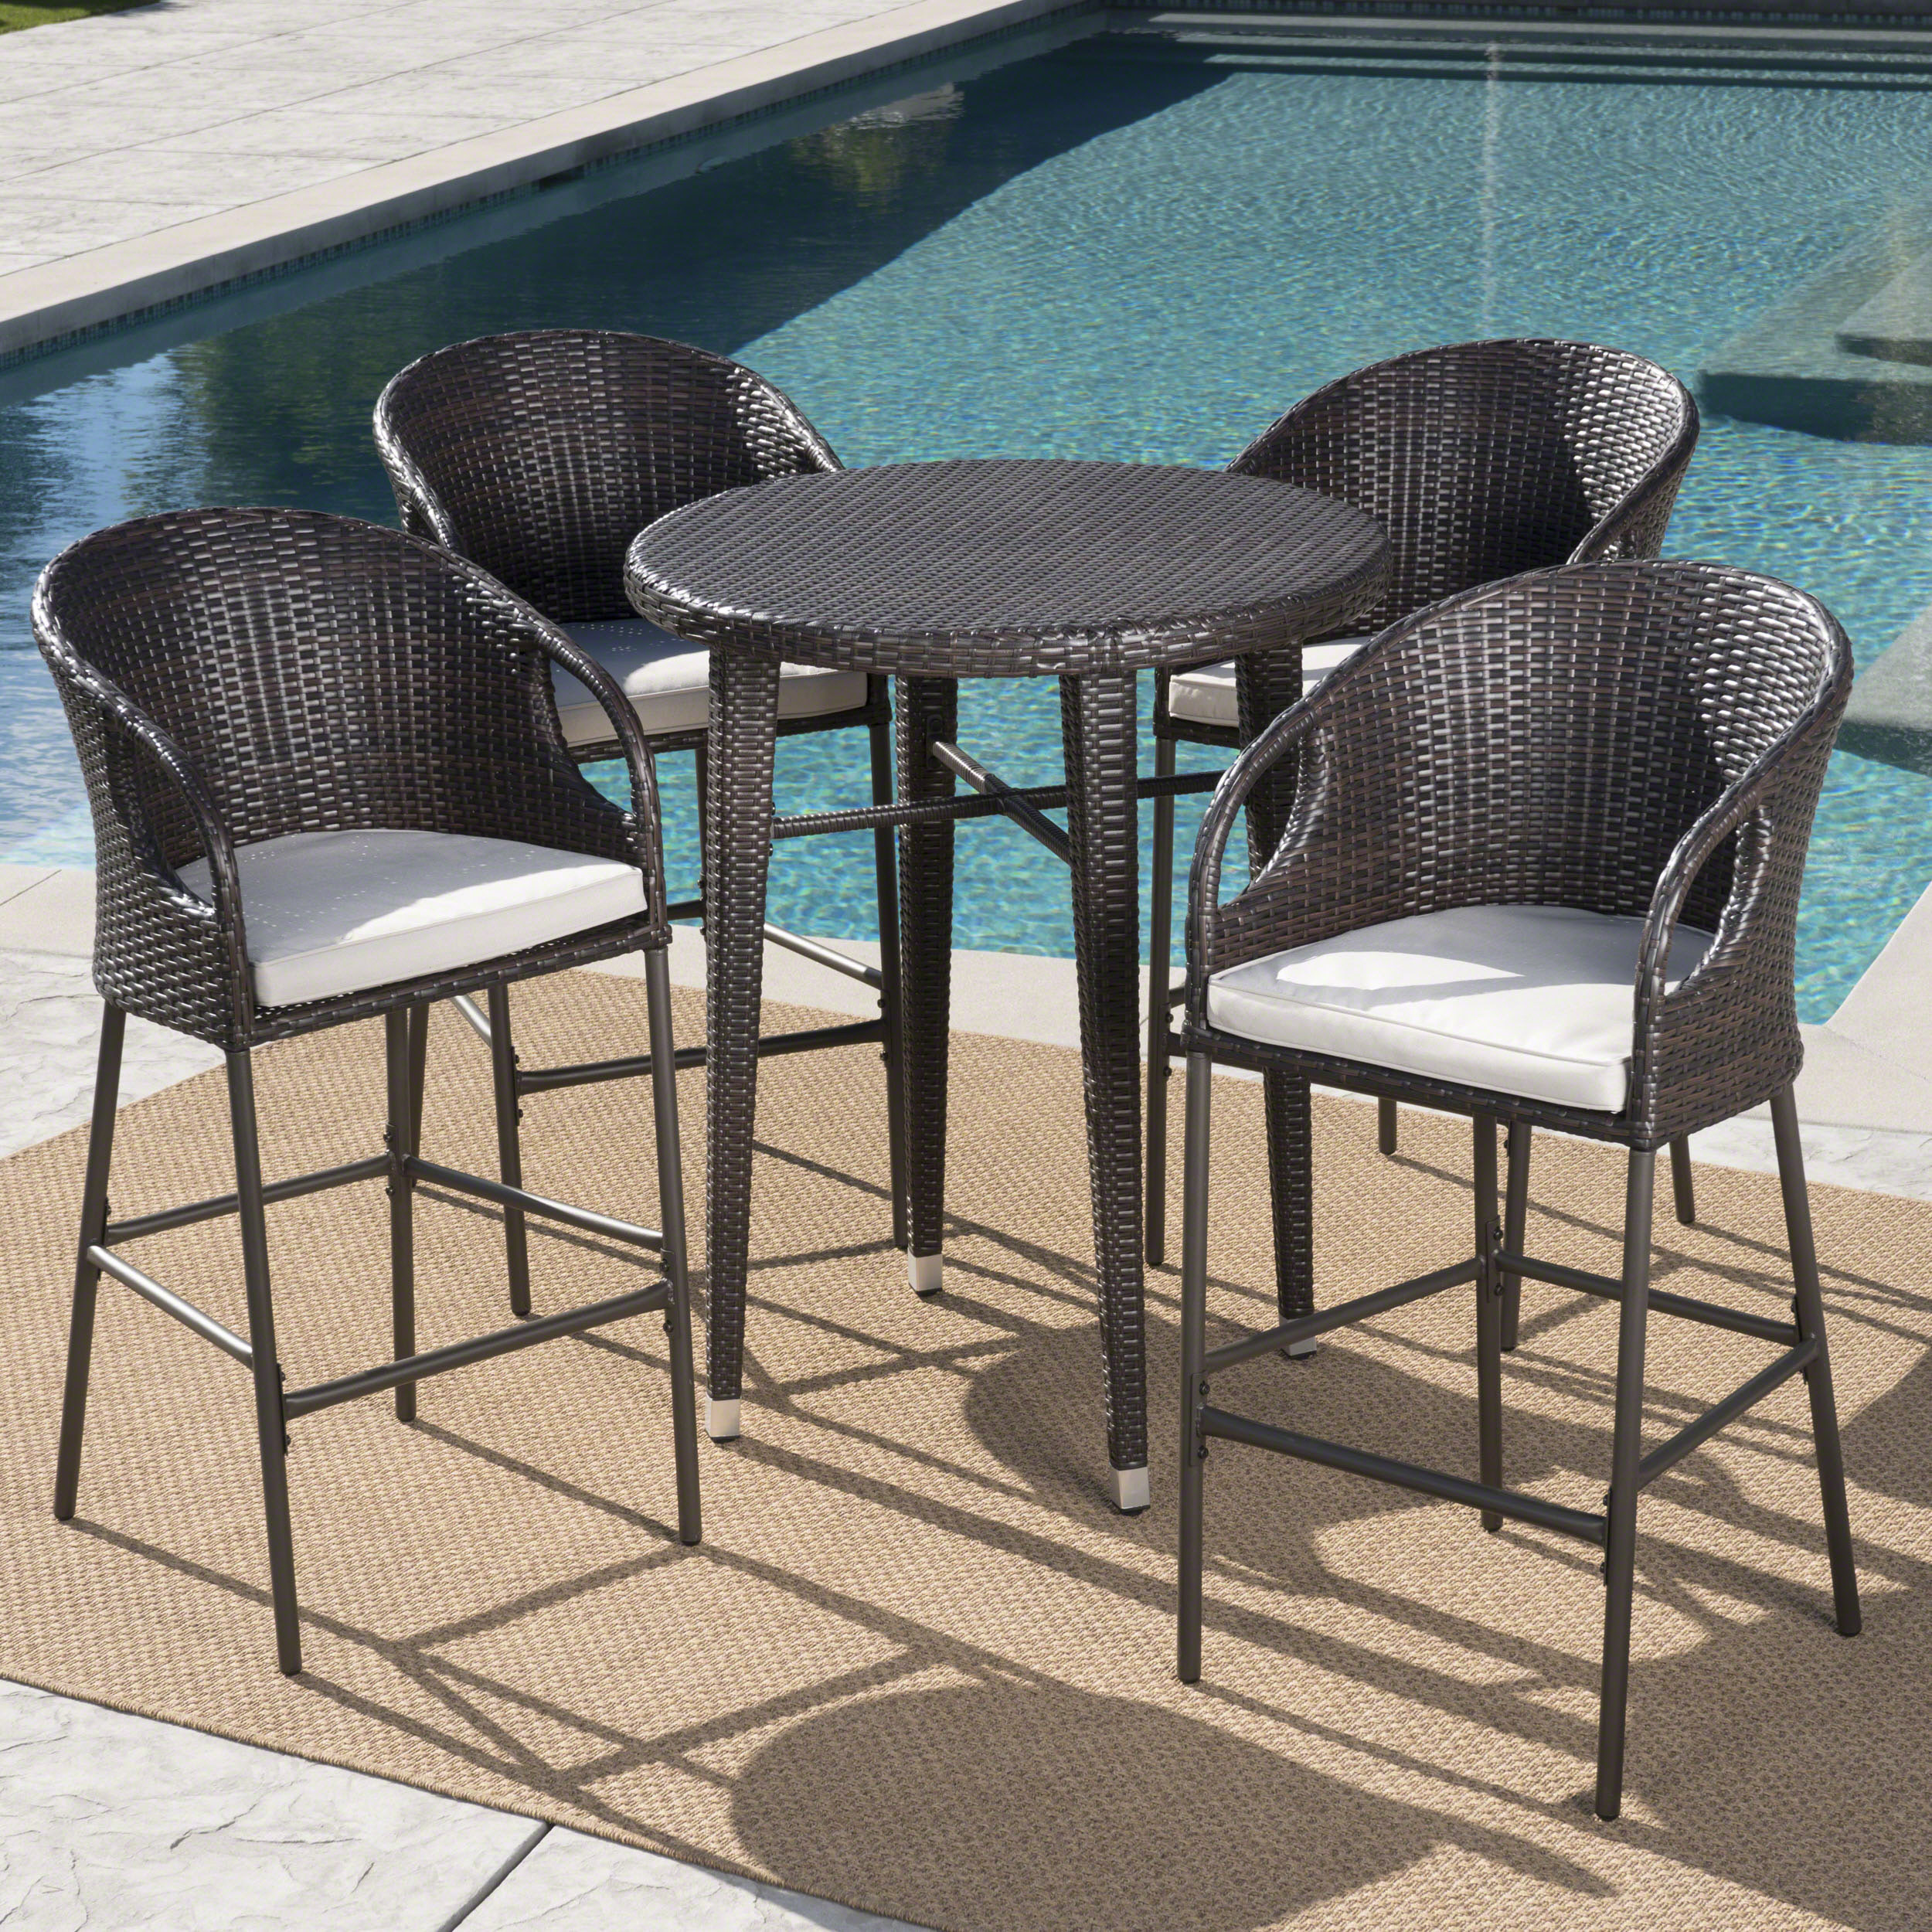 GDF Studio Breakwater Outdoor Wicker 5 Piece Bar Set with Cushion, Multibrown and Light Brown - image 3 of 13